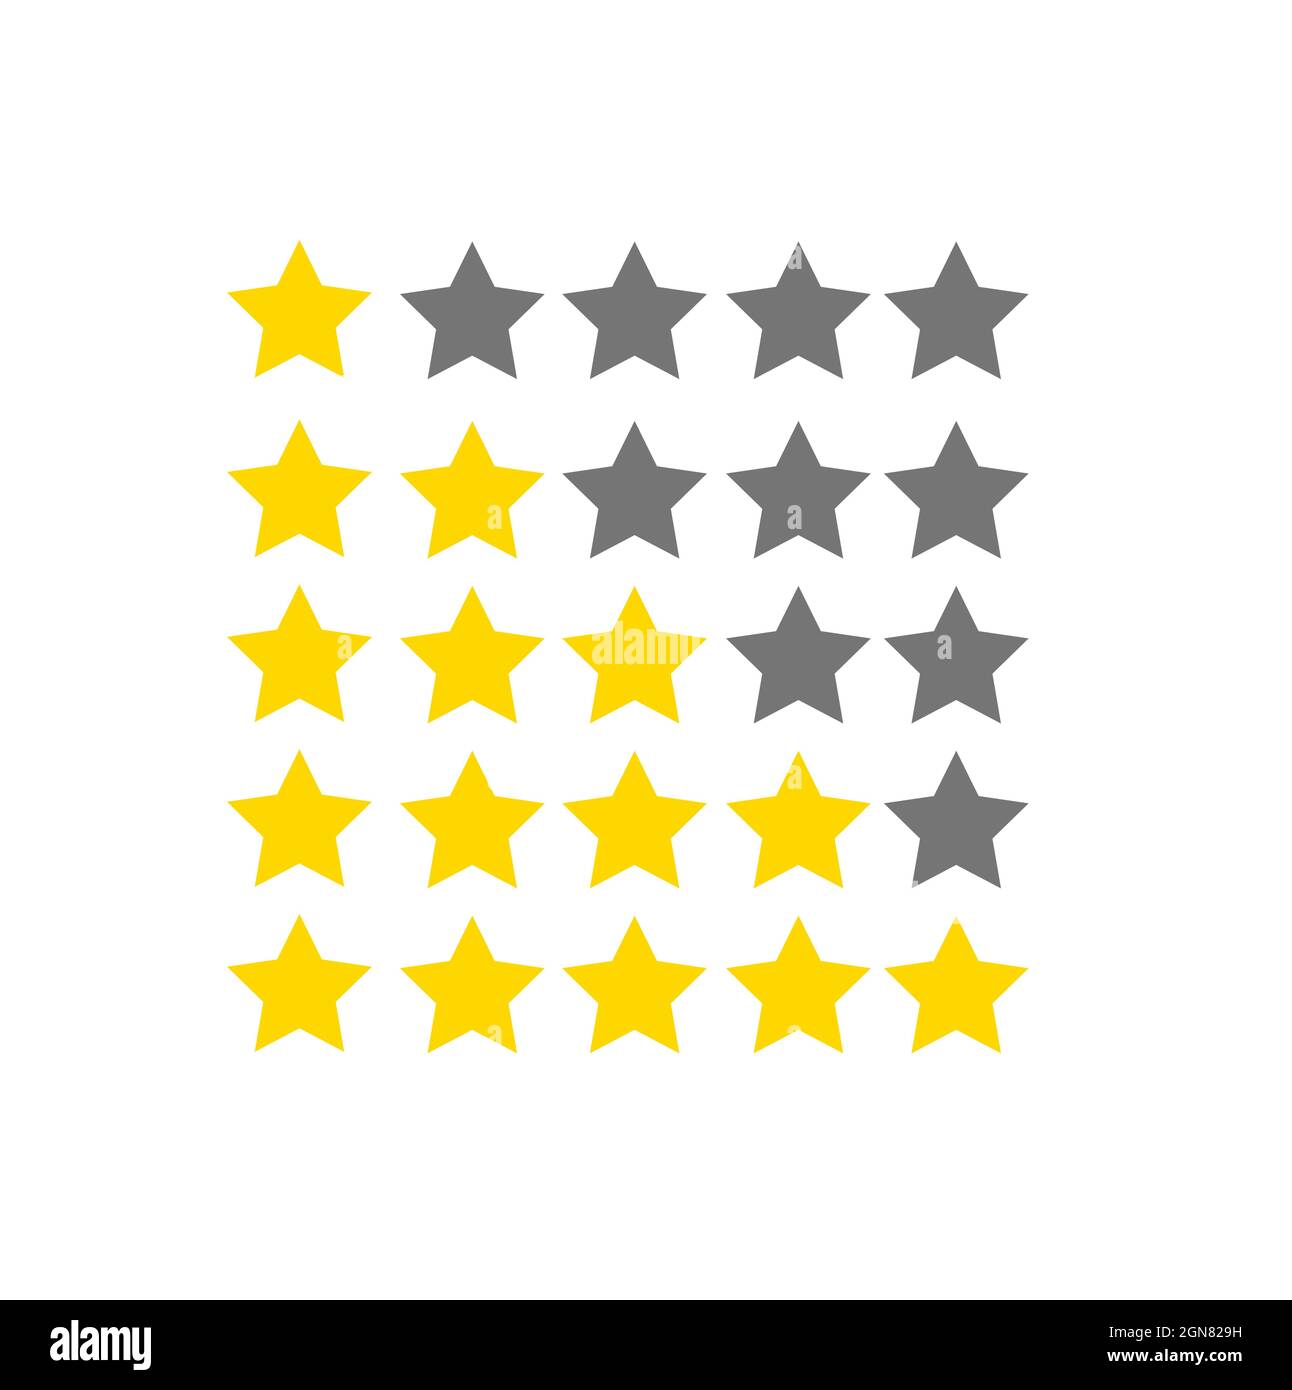 five star rating icon vector illustration eps 9. 1 to 5 star ranking star isolated on white background Stock Vector